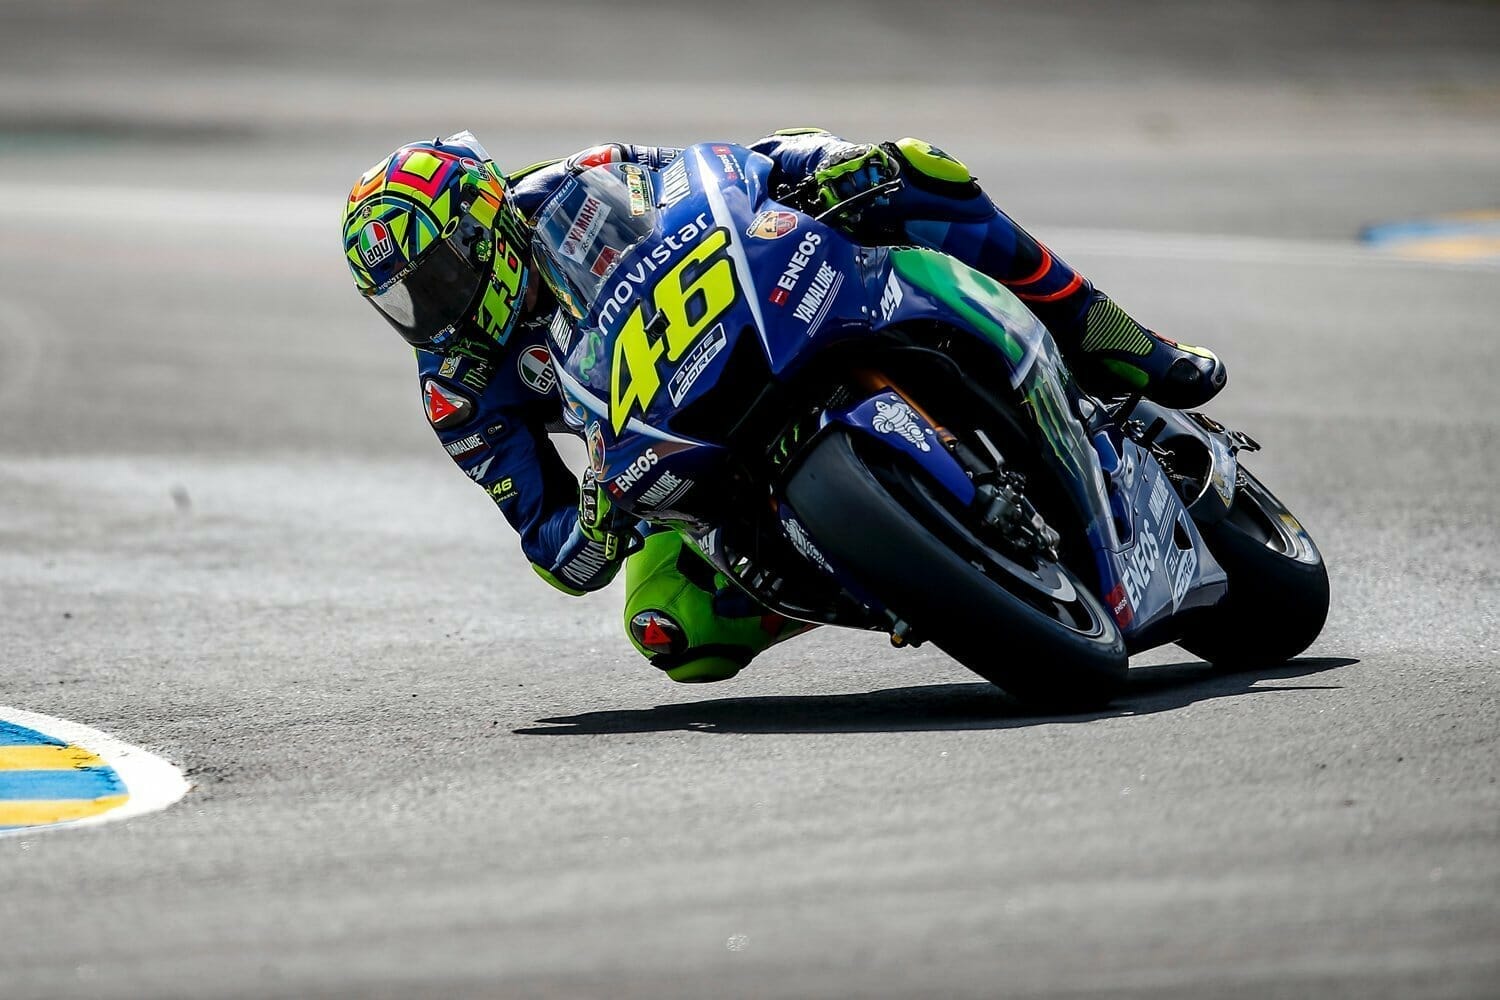 Valentino Rossi after motocross accident in the hospital - Motorcycles ...